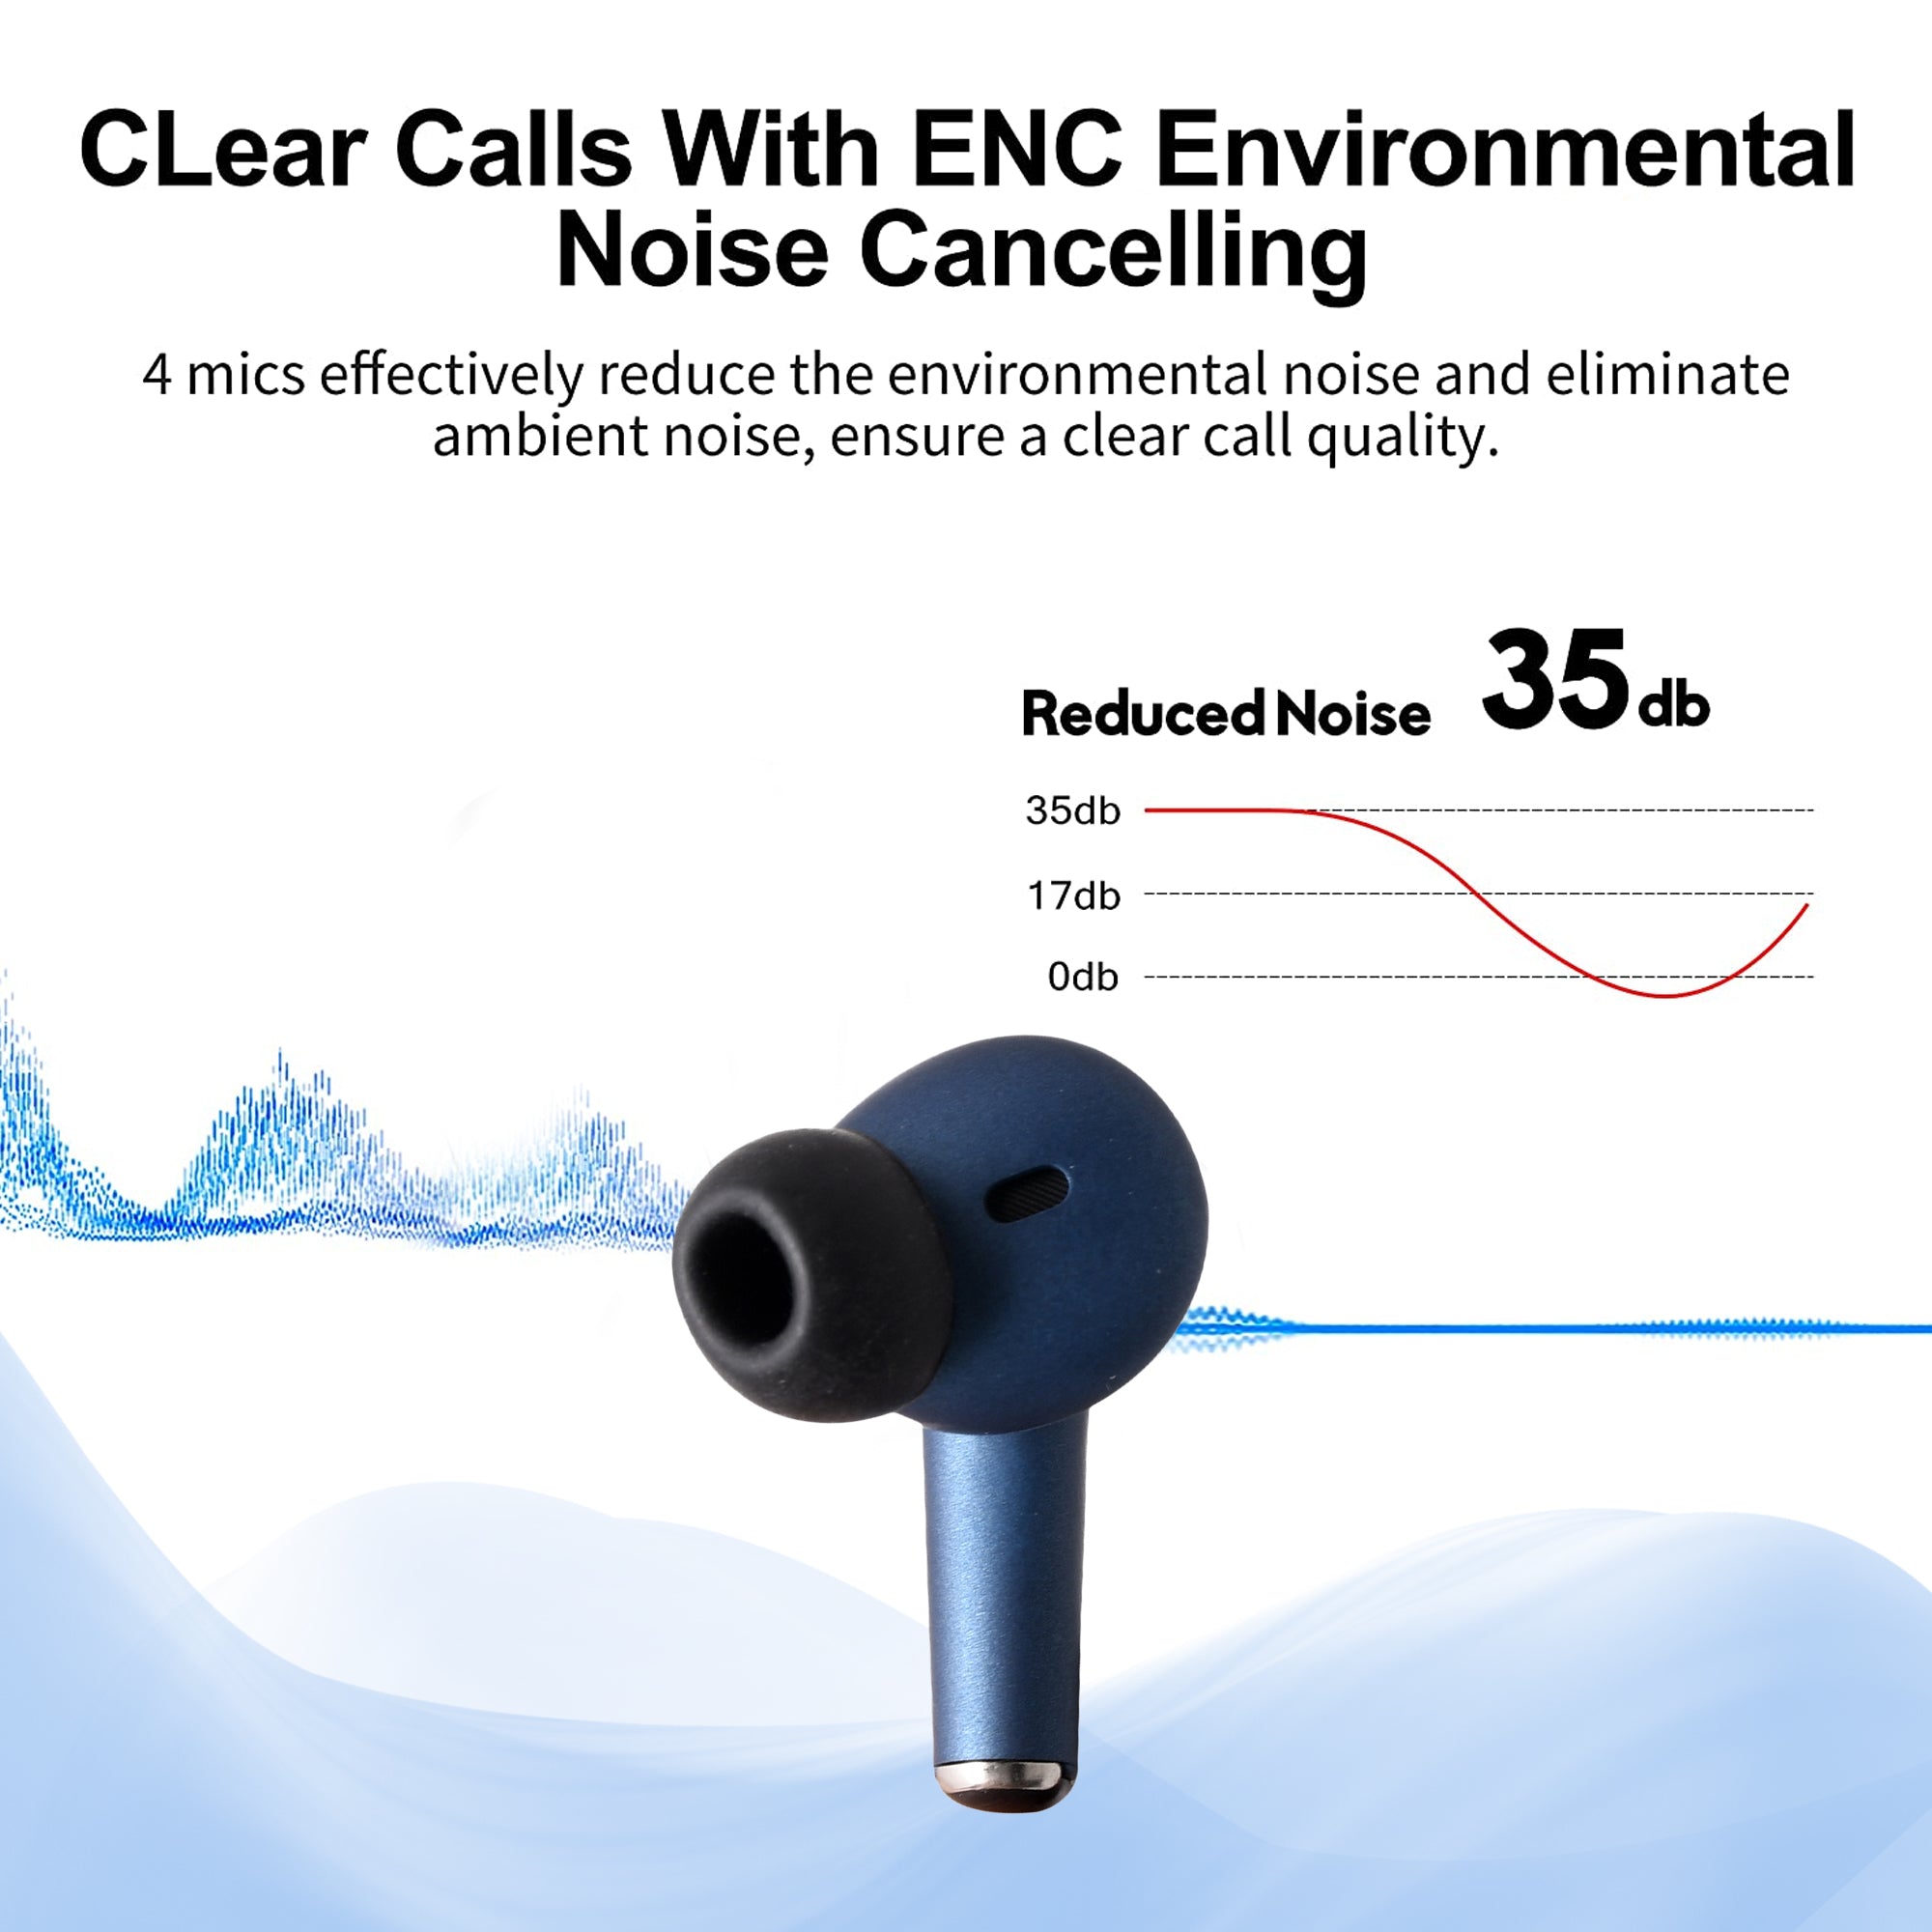 ENC Feature of BT 102 with a blue earbud